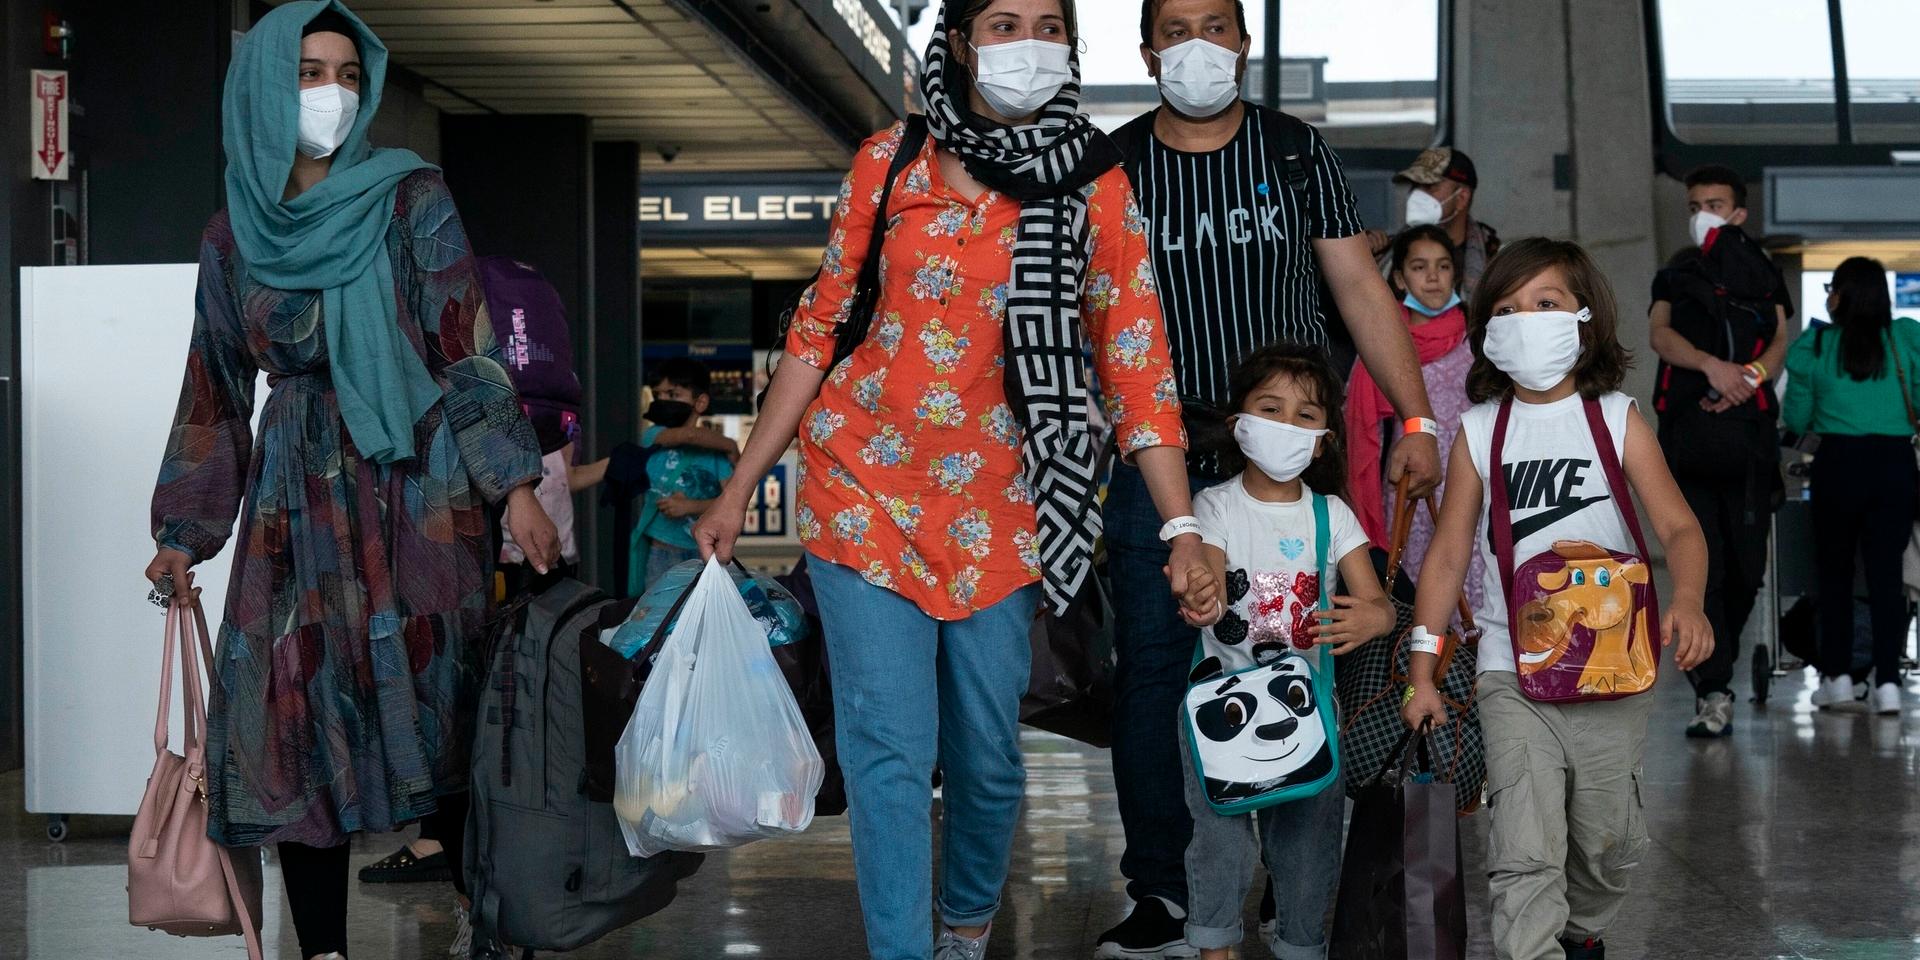 Families evacuated from Kabul, Afghanistan, walk through the terminal to board a bus after they arrived at Washington Dulles International Airport, in Chantilly, Va., on Sunday, Aug. 29, 2021. (AP Photo/Jose Luis Magana)  VAJL118